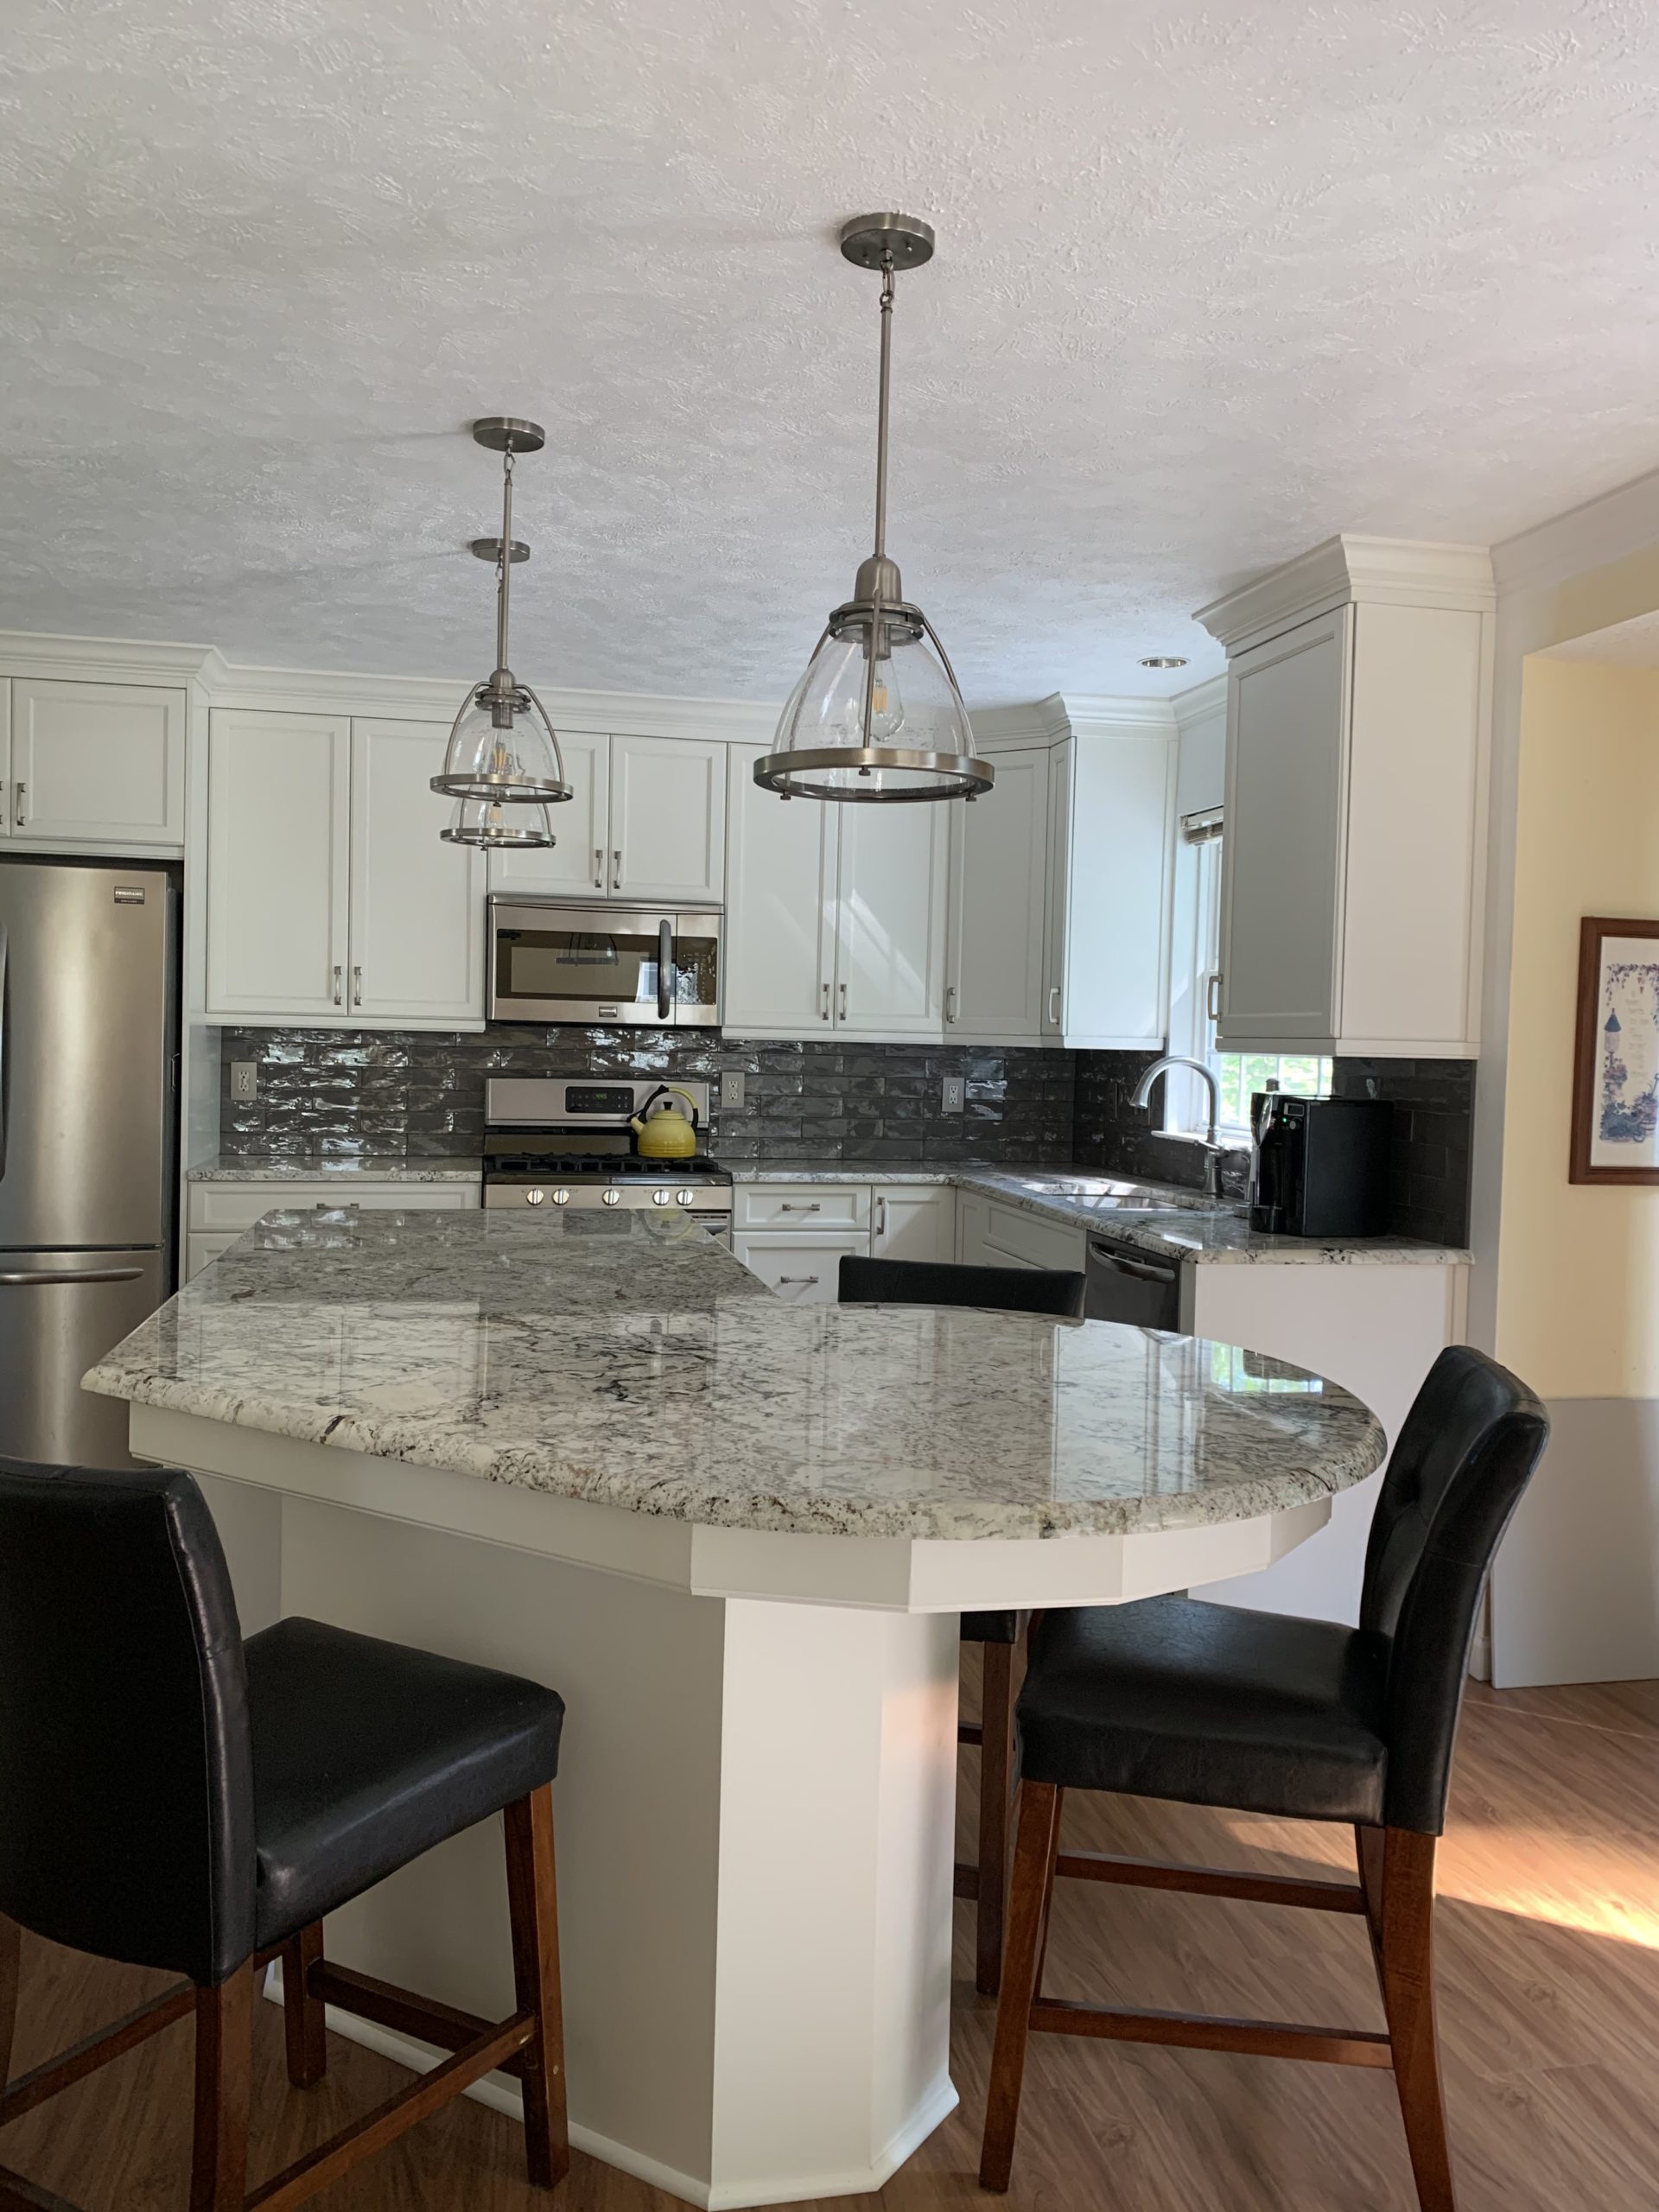  |  White Kitchen Marble Island and Light Fixtures